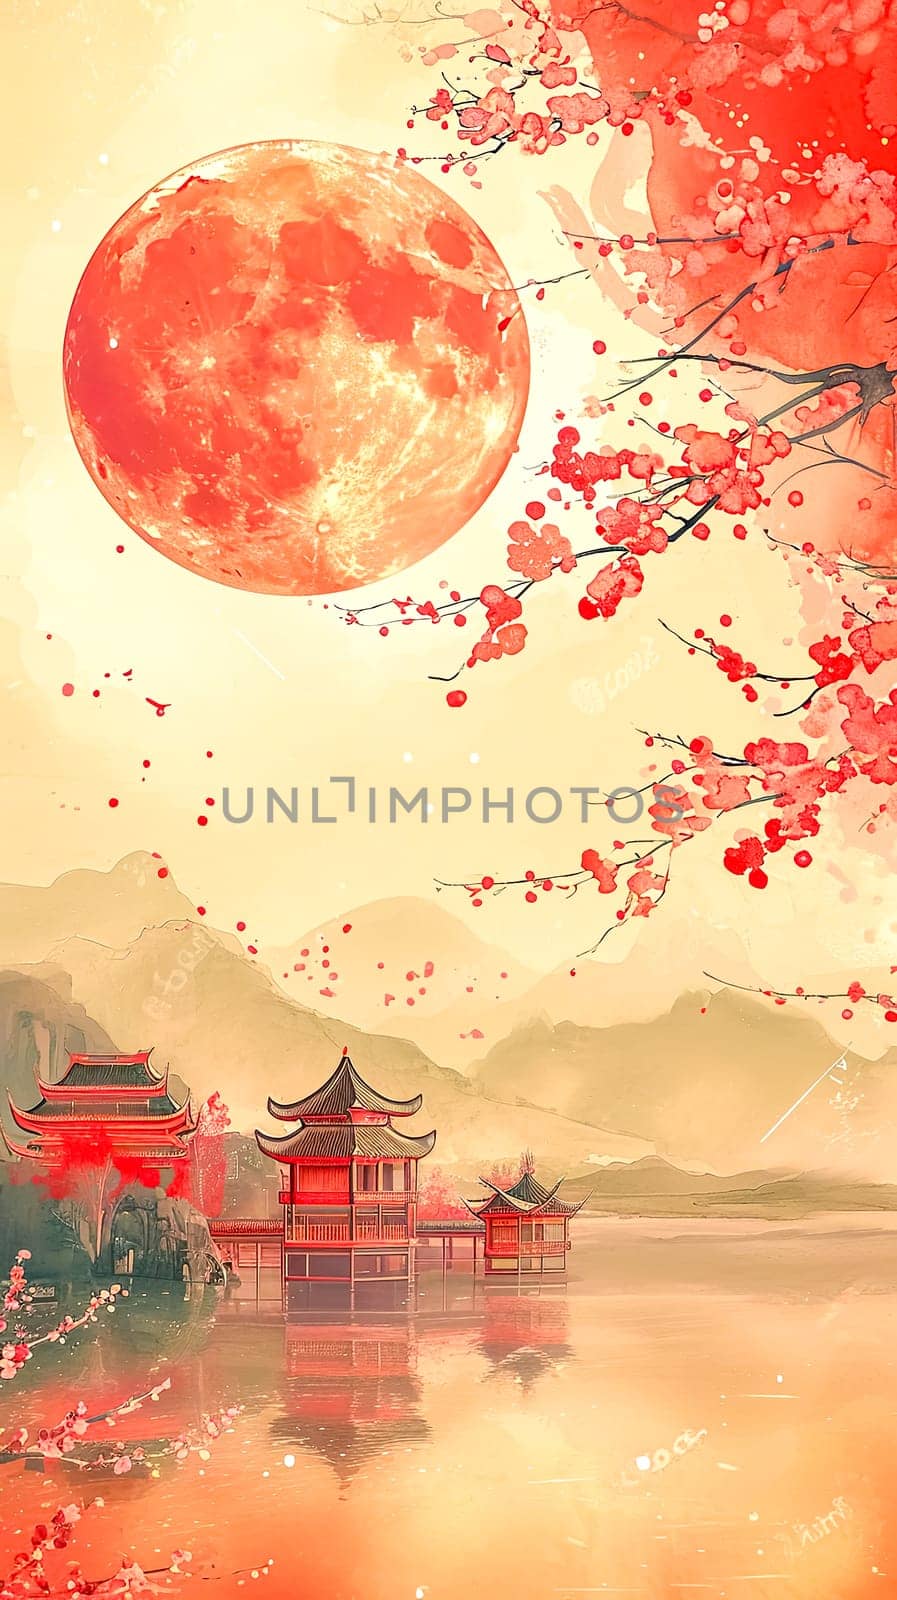 Chinese landscape painting in 3D, featuring traditional architecture, a large red moon, and cherry blossoms, all infused with a warm, ethereal glow by Edophoto